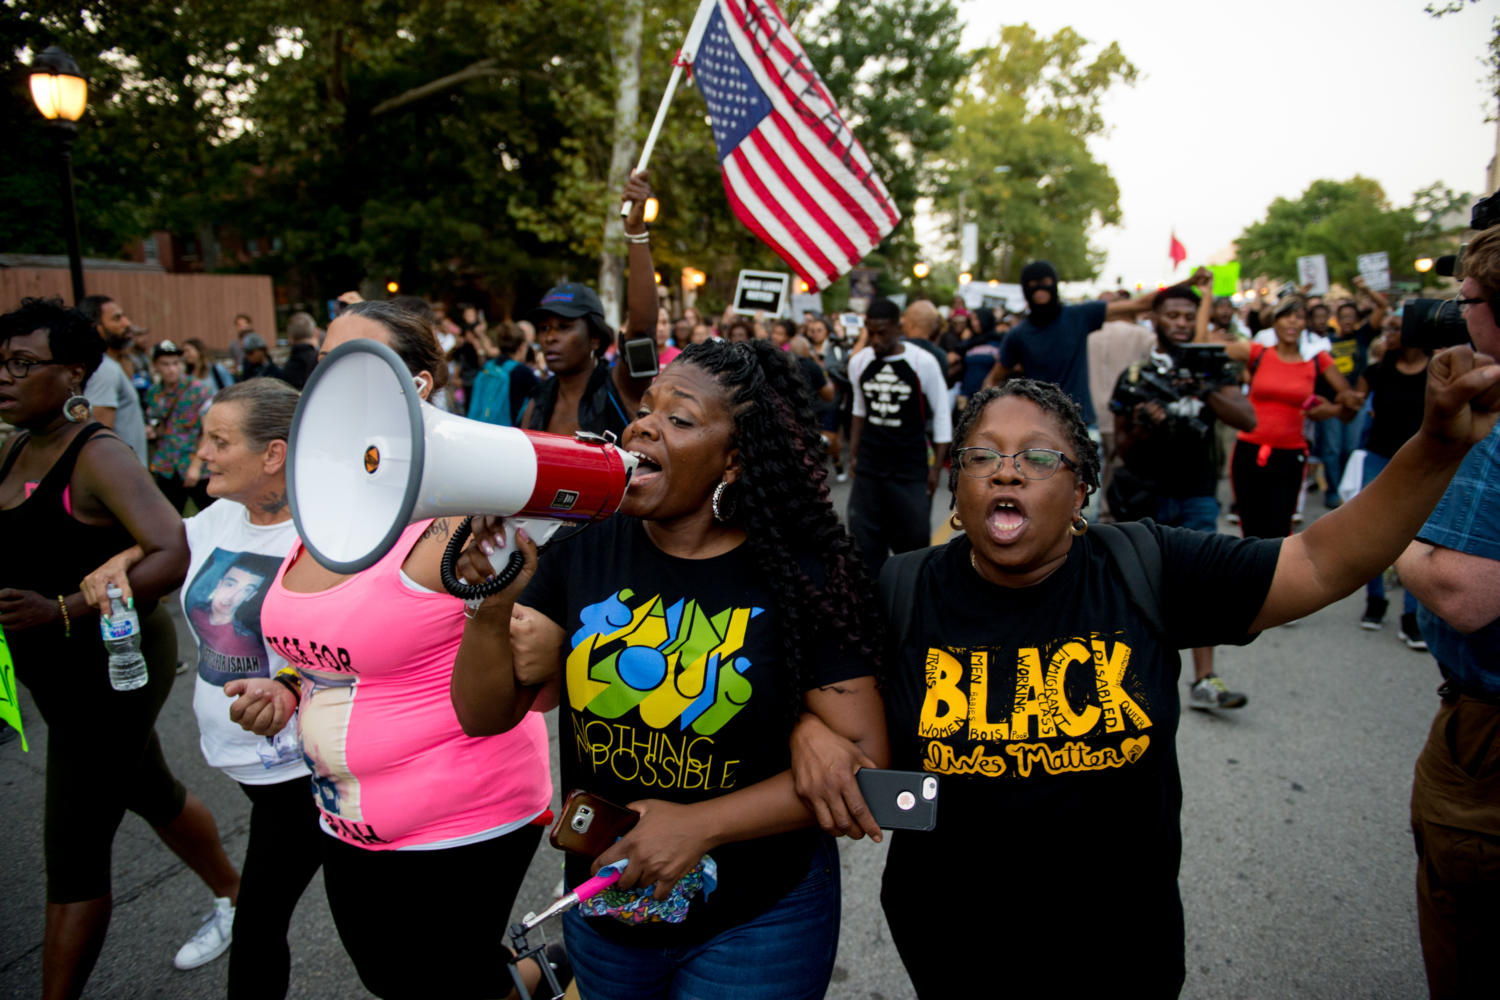 Candidate for Missouris St. Louis-based 1st Congressional District, Cori Bush, protests alongside hundreds Saturday, Sept. 16, 2017, in St. Louis, Missouri. The protests come a day after former St. Louis police officer Jason Stockley was found not guilty in the fatal shooting of Anthony Lamar Smith. (Brian Muñoz | @BrianMMunoz)